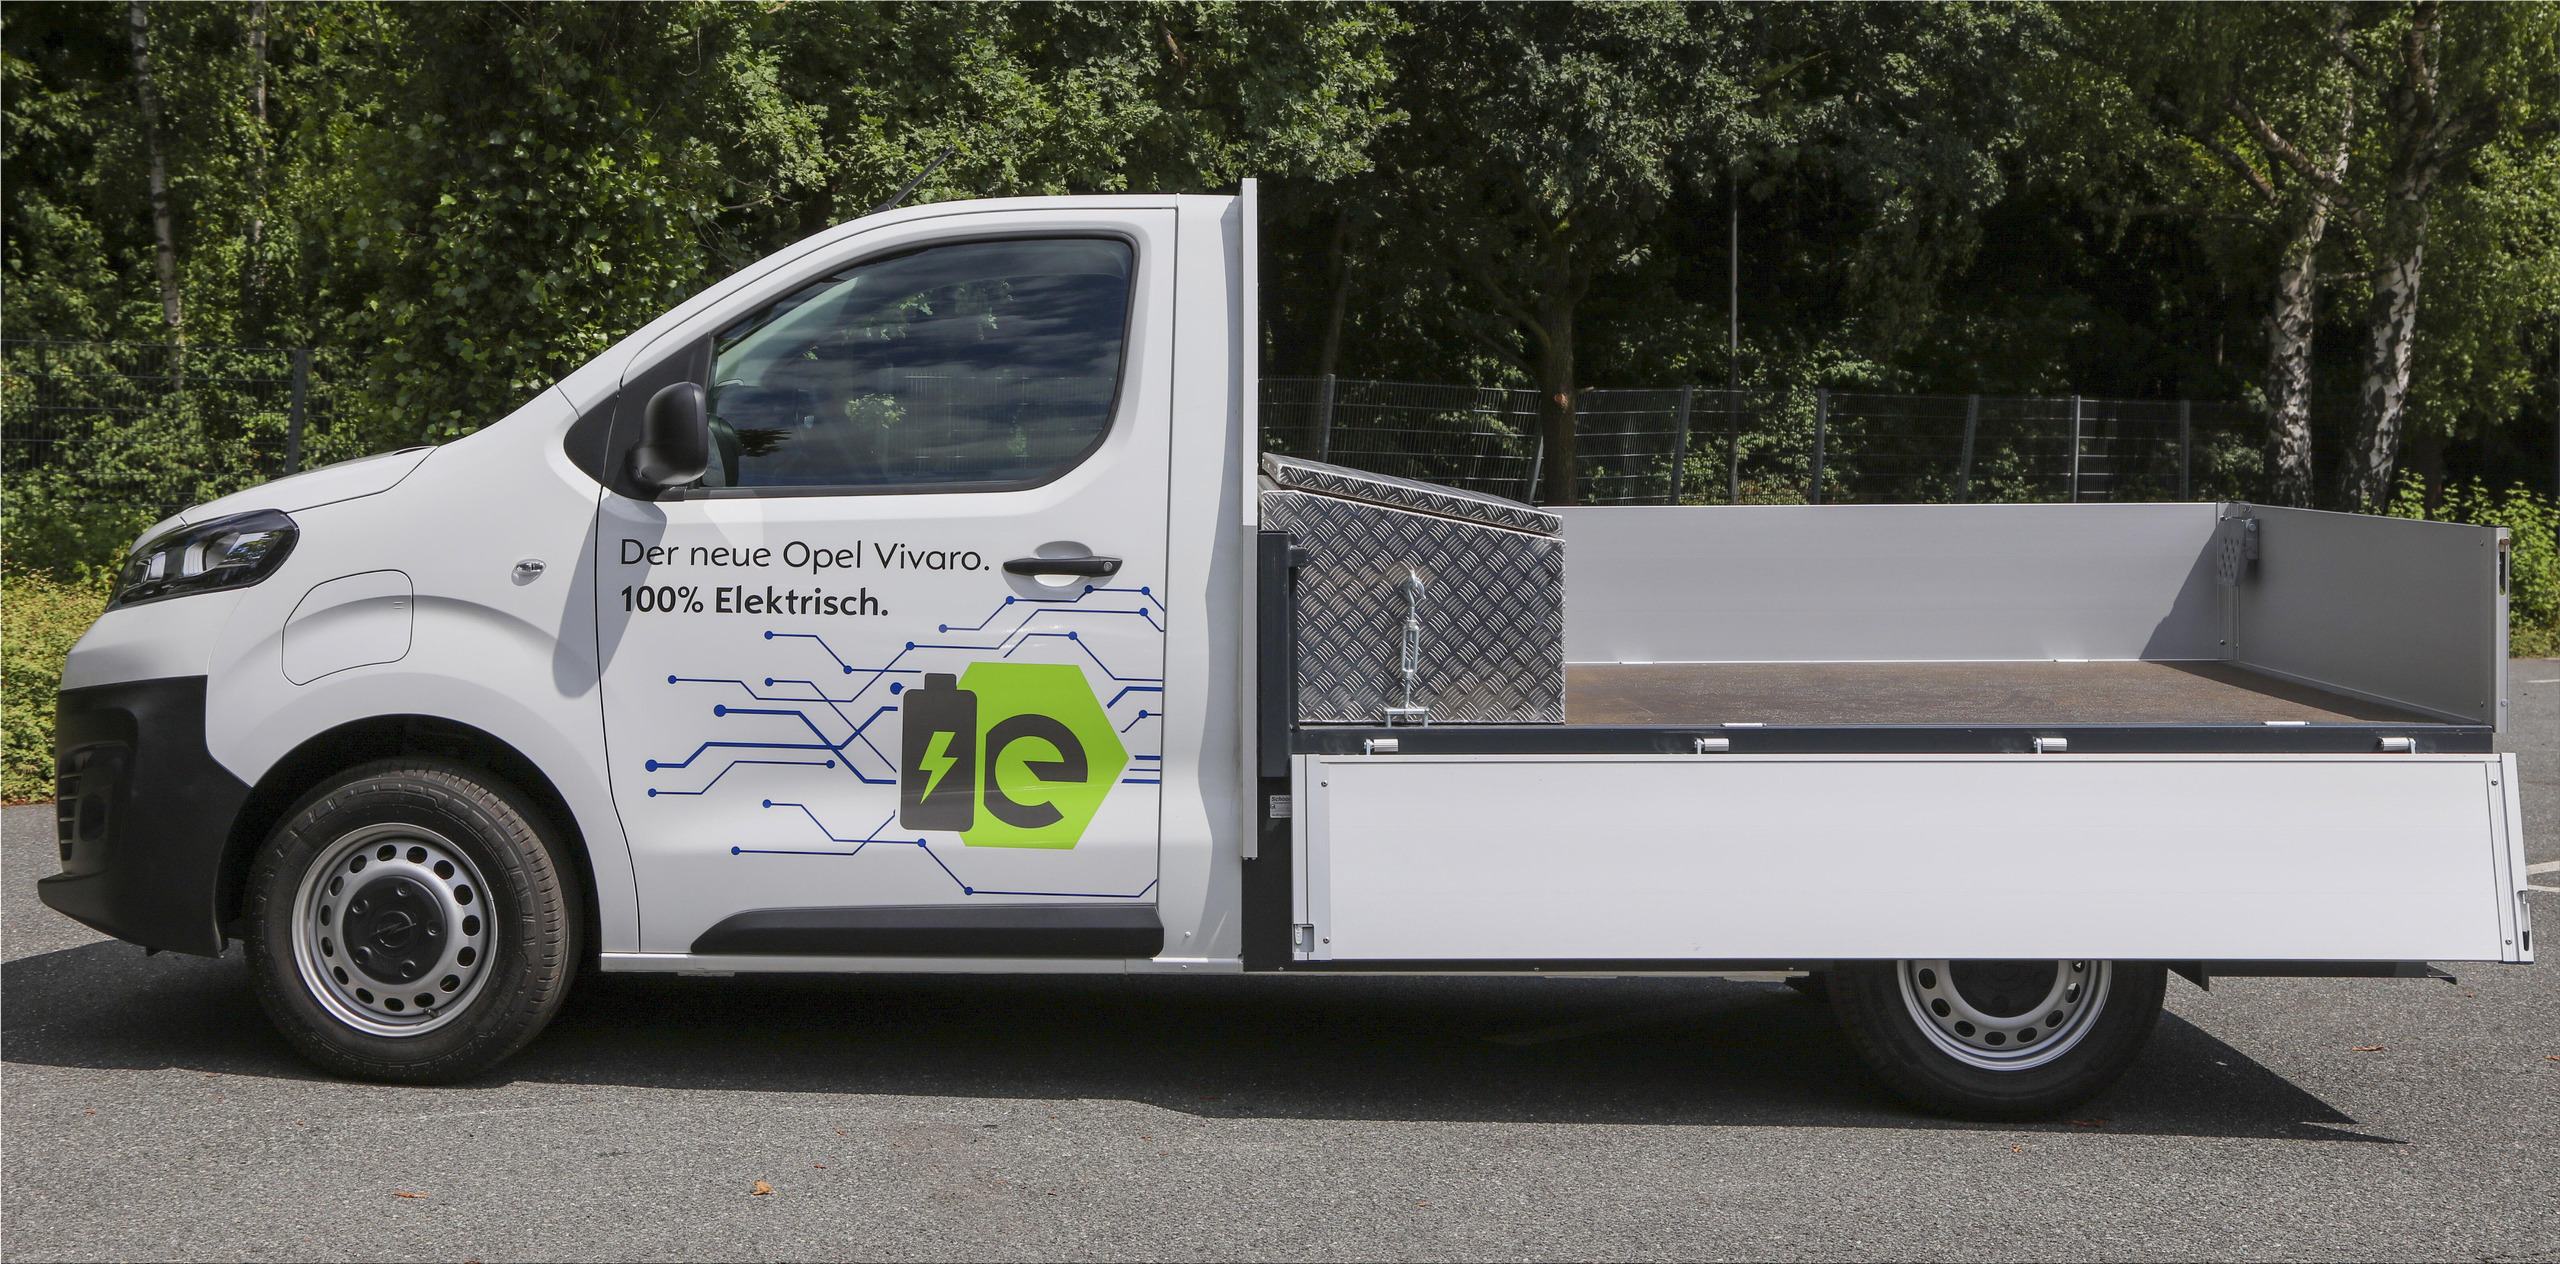 The Opel Vivaro-e electric van is now available as a flatbed van